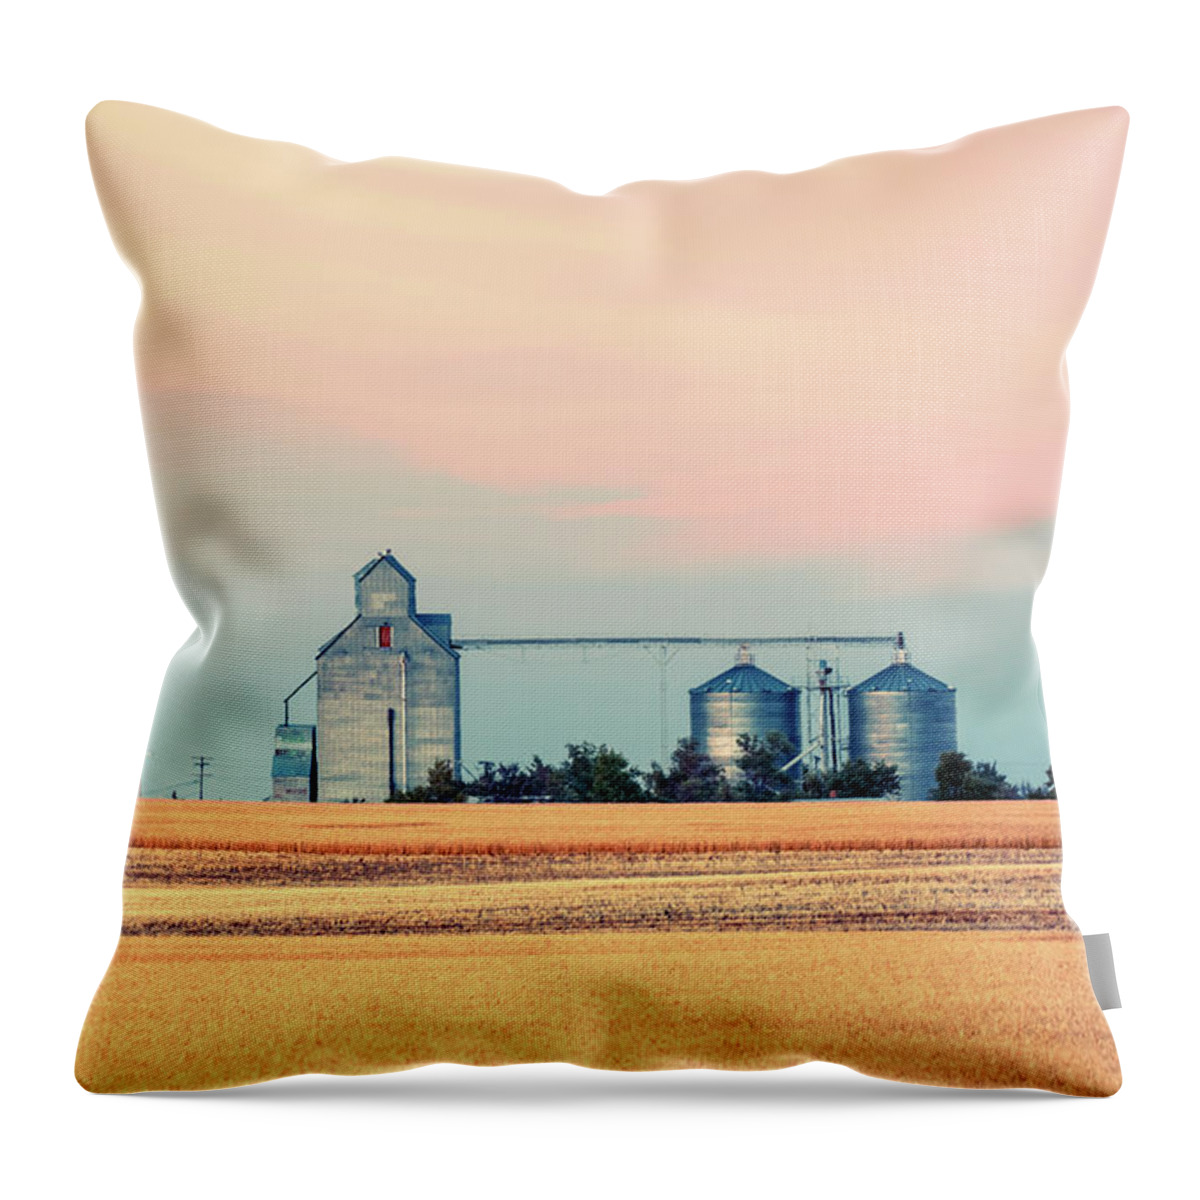 Dutton Throw Pillow featuring the photograph Delightful Dutton by Todd Klassy